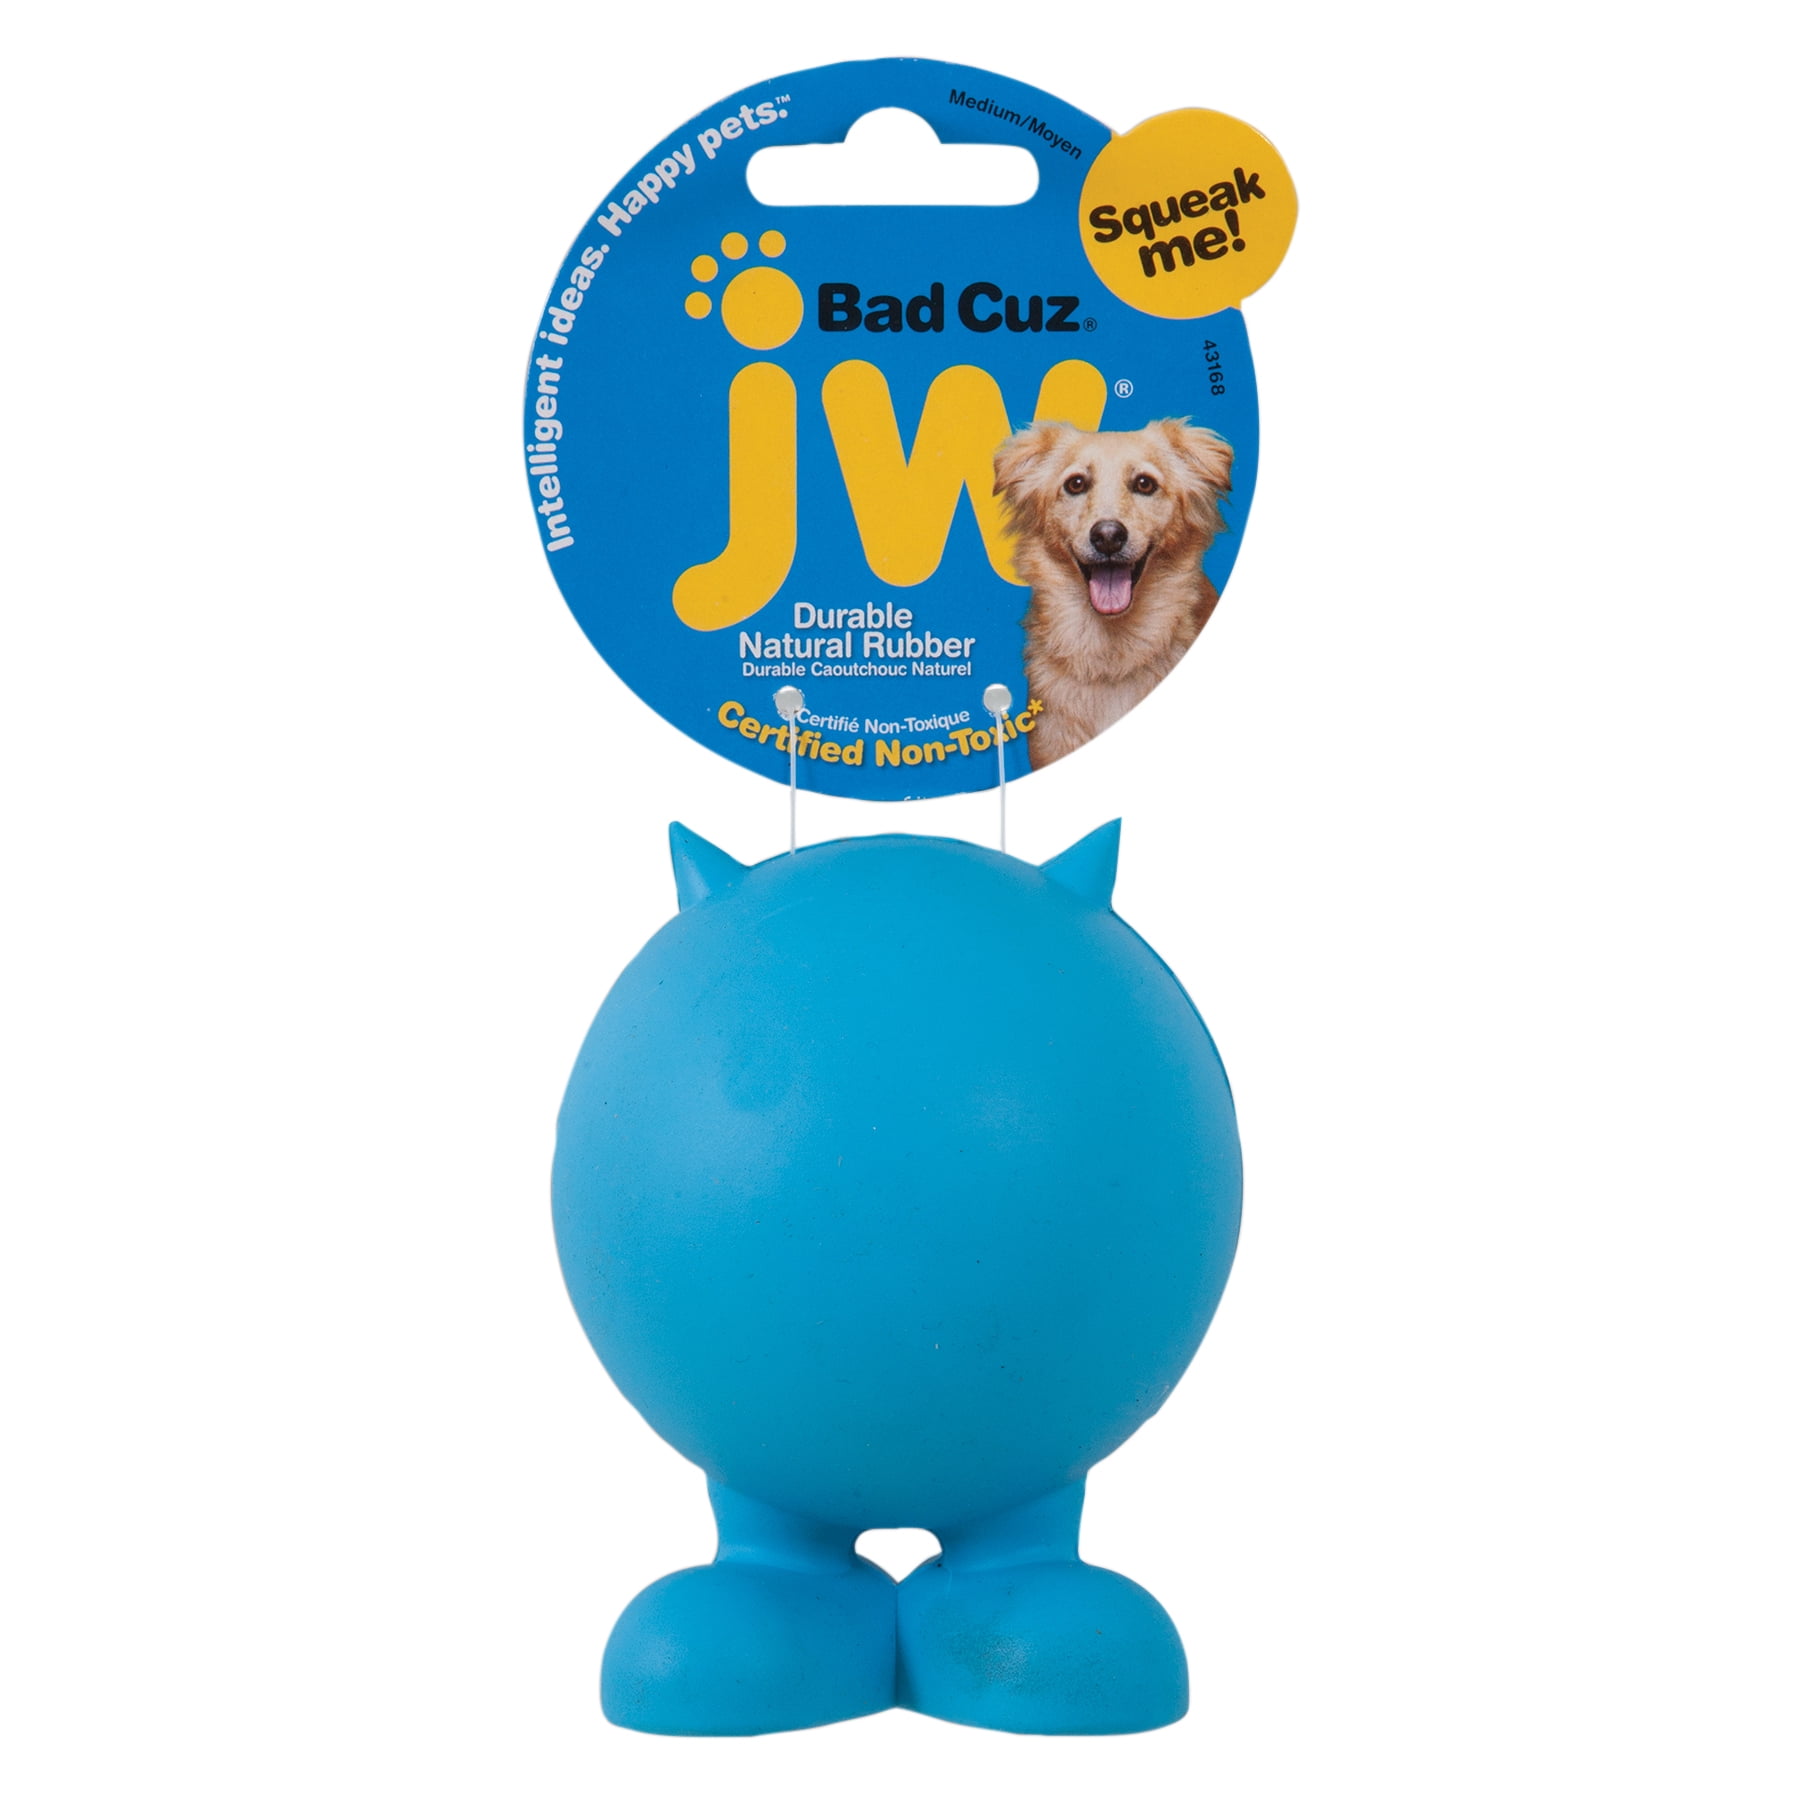 JW Large Squeaky Barbell Dog Toy, Assorted Colors - Shop Chew Toys